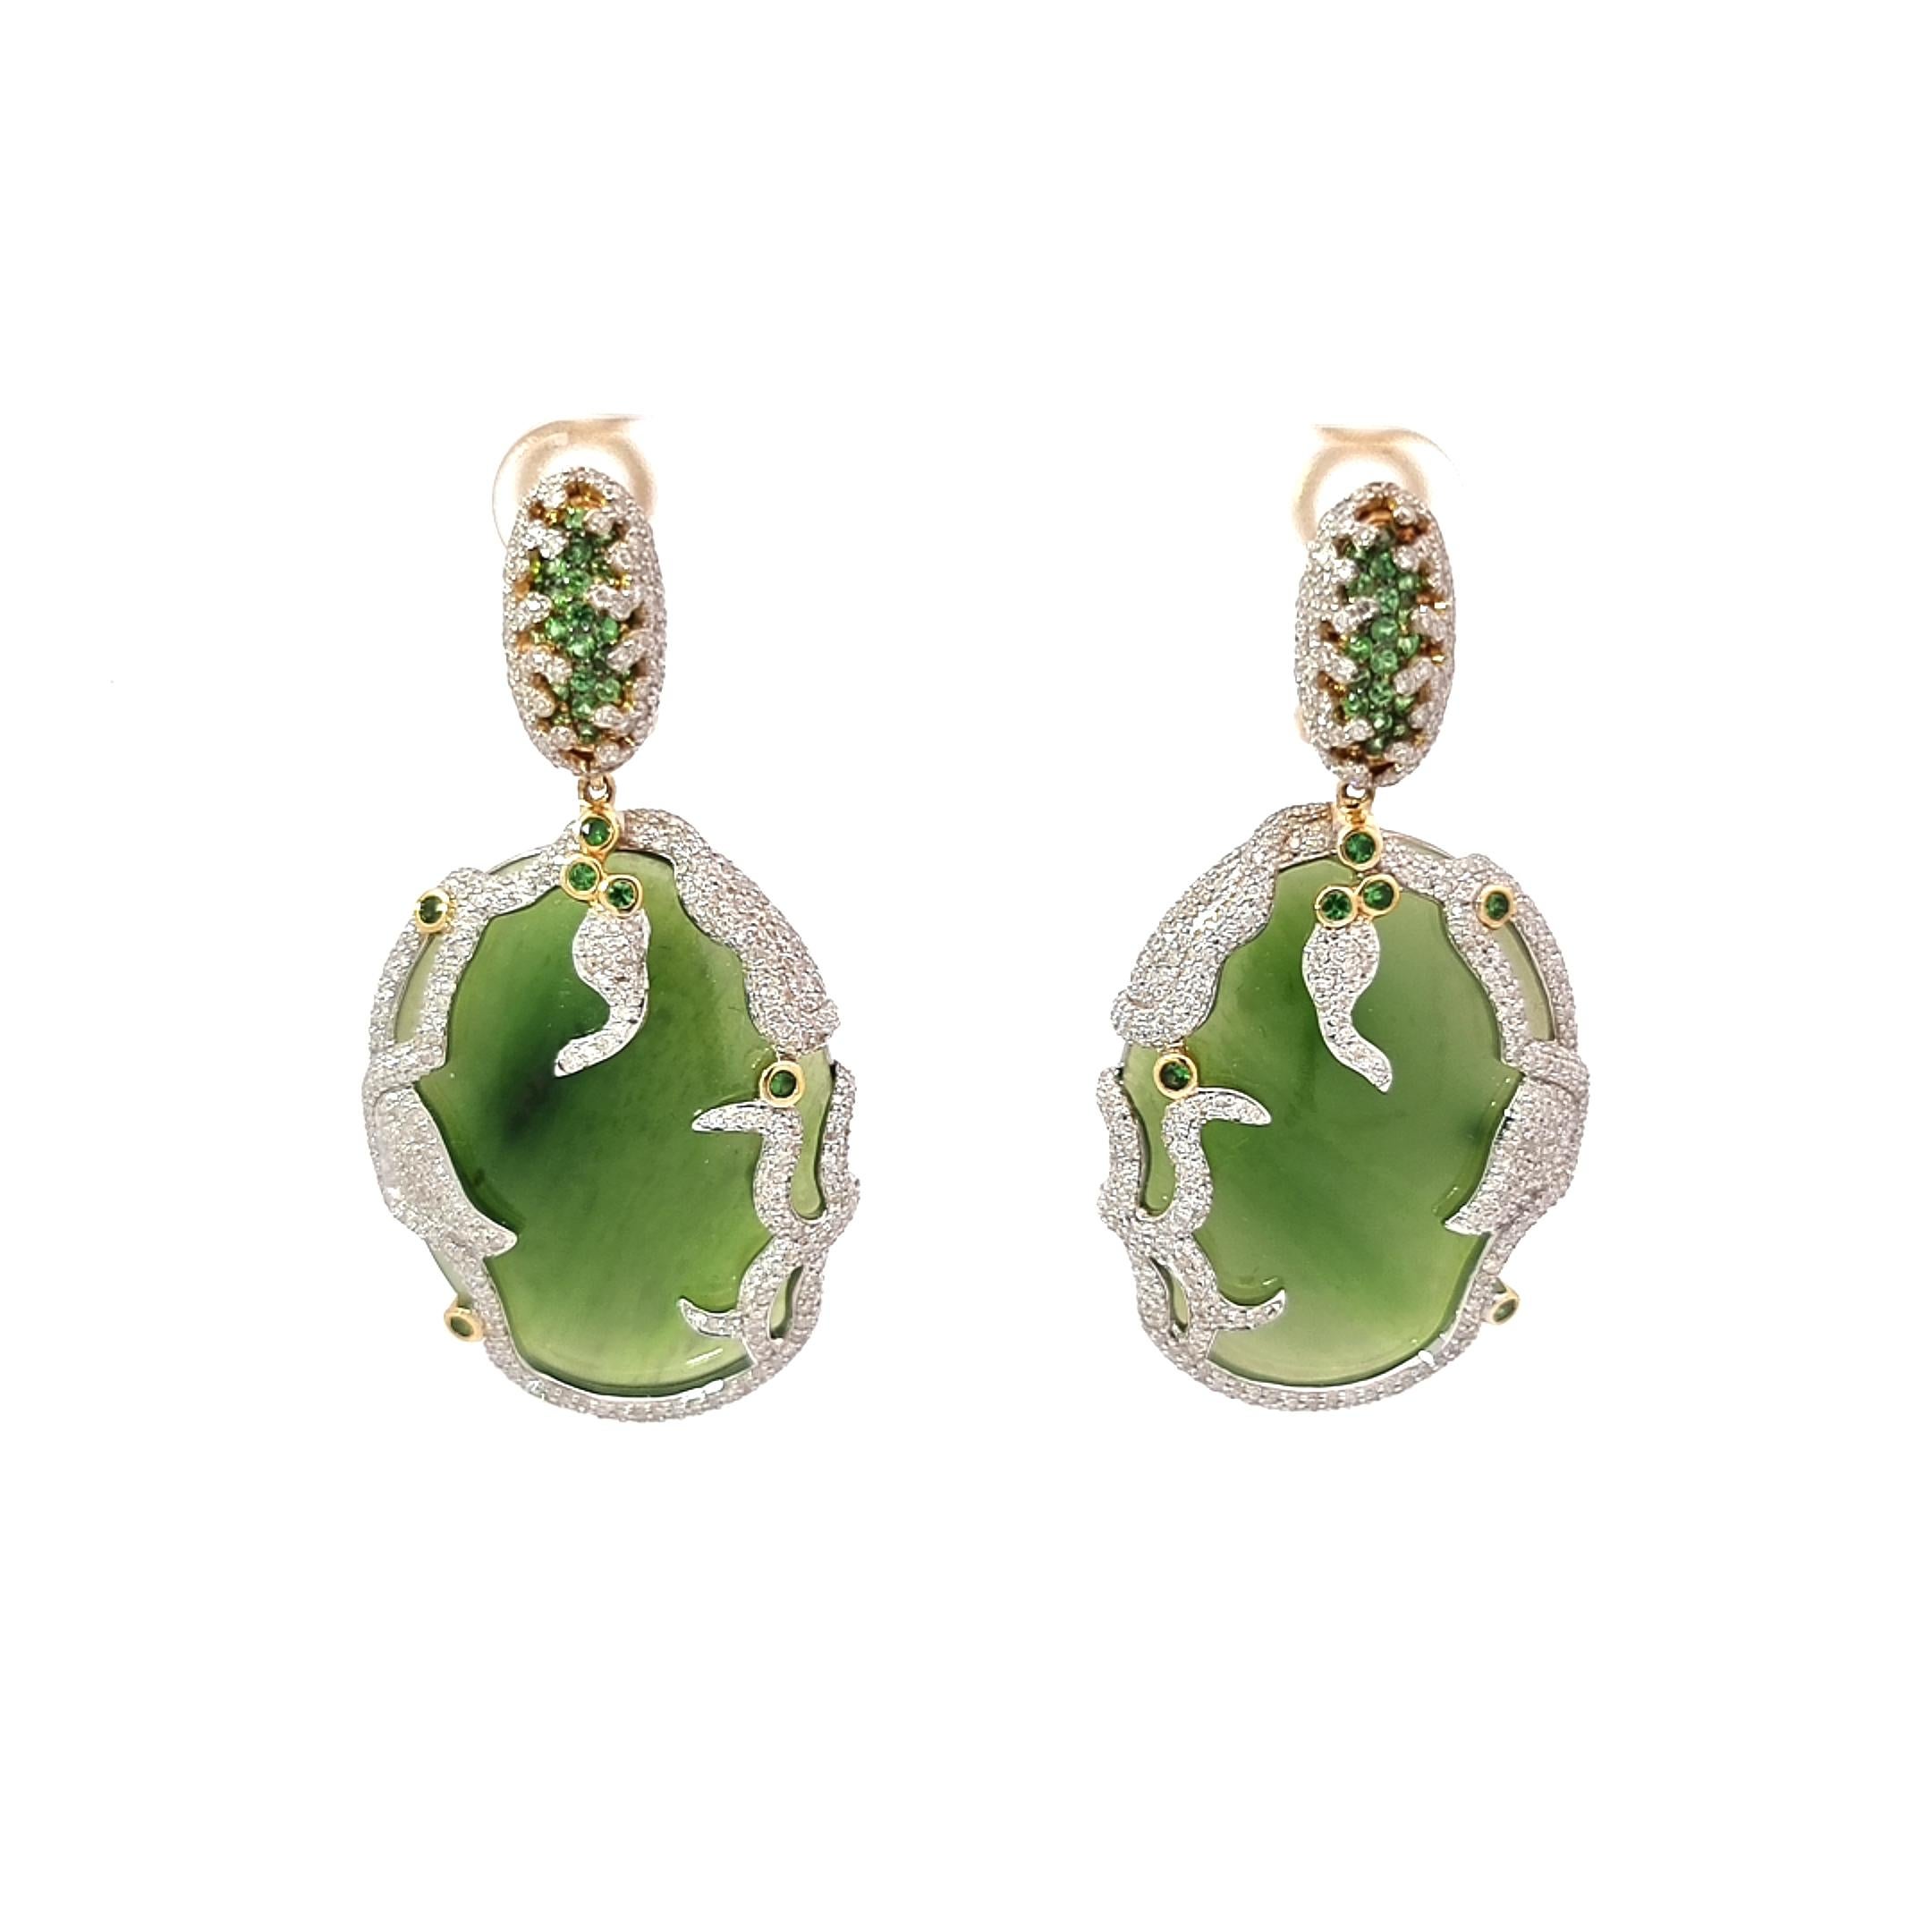 Round Cut Yellow Gold Earrings in 18K with White Diamonds, Jade, and Tsavorites For Sale